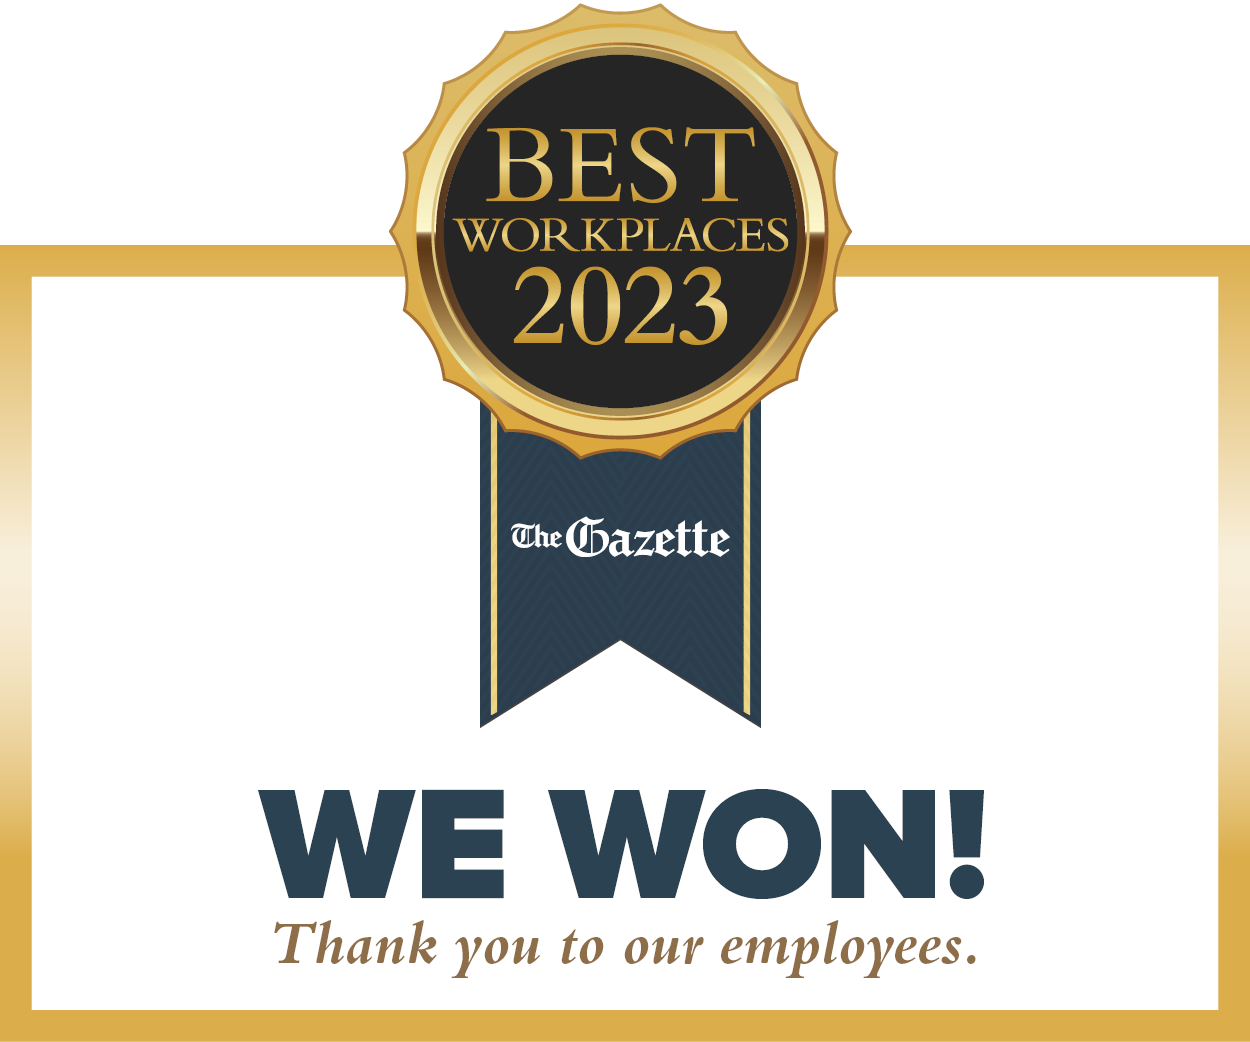 Best Workplaces 2023 ribbon and text, "we won!"